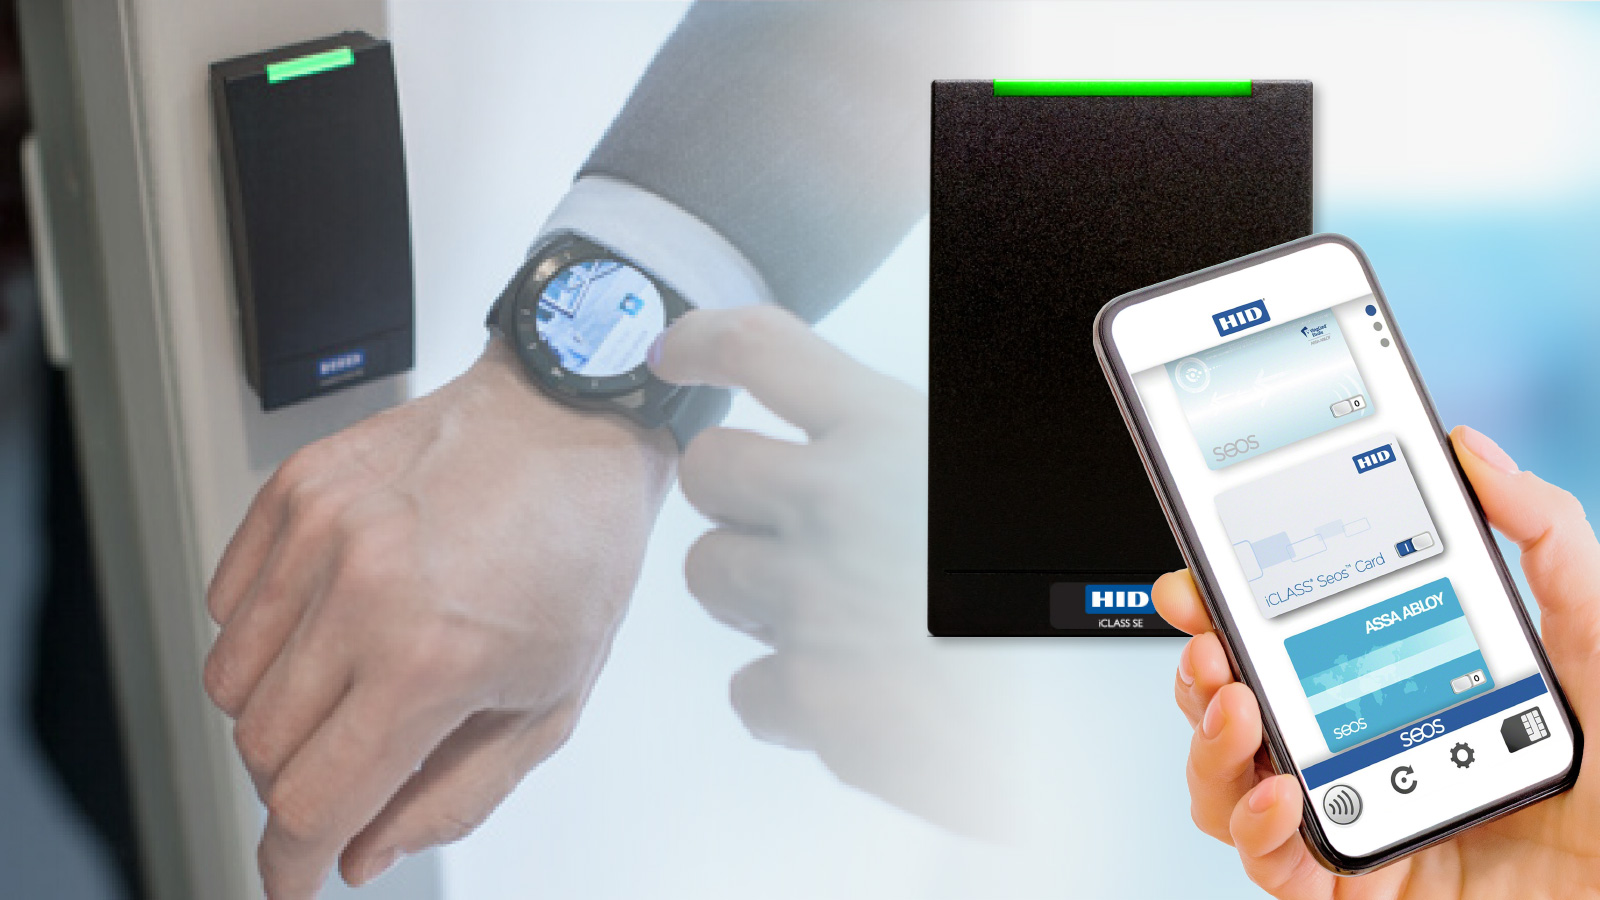 Mobile Access Wearable Watch and Phone Unlocking Doors